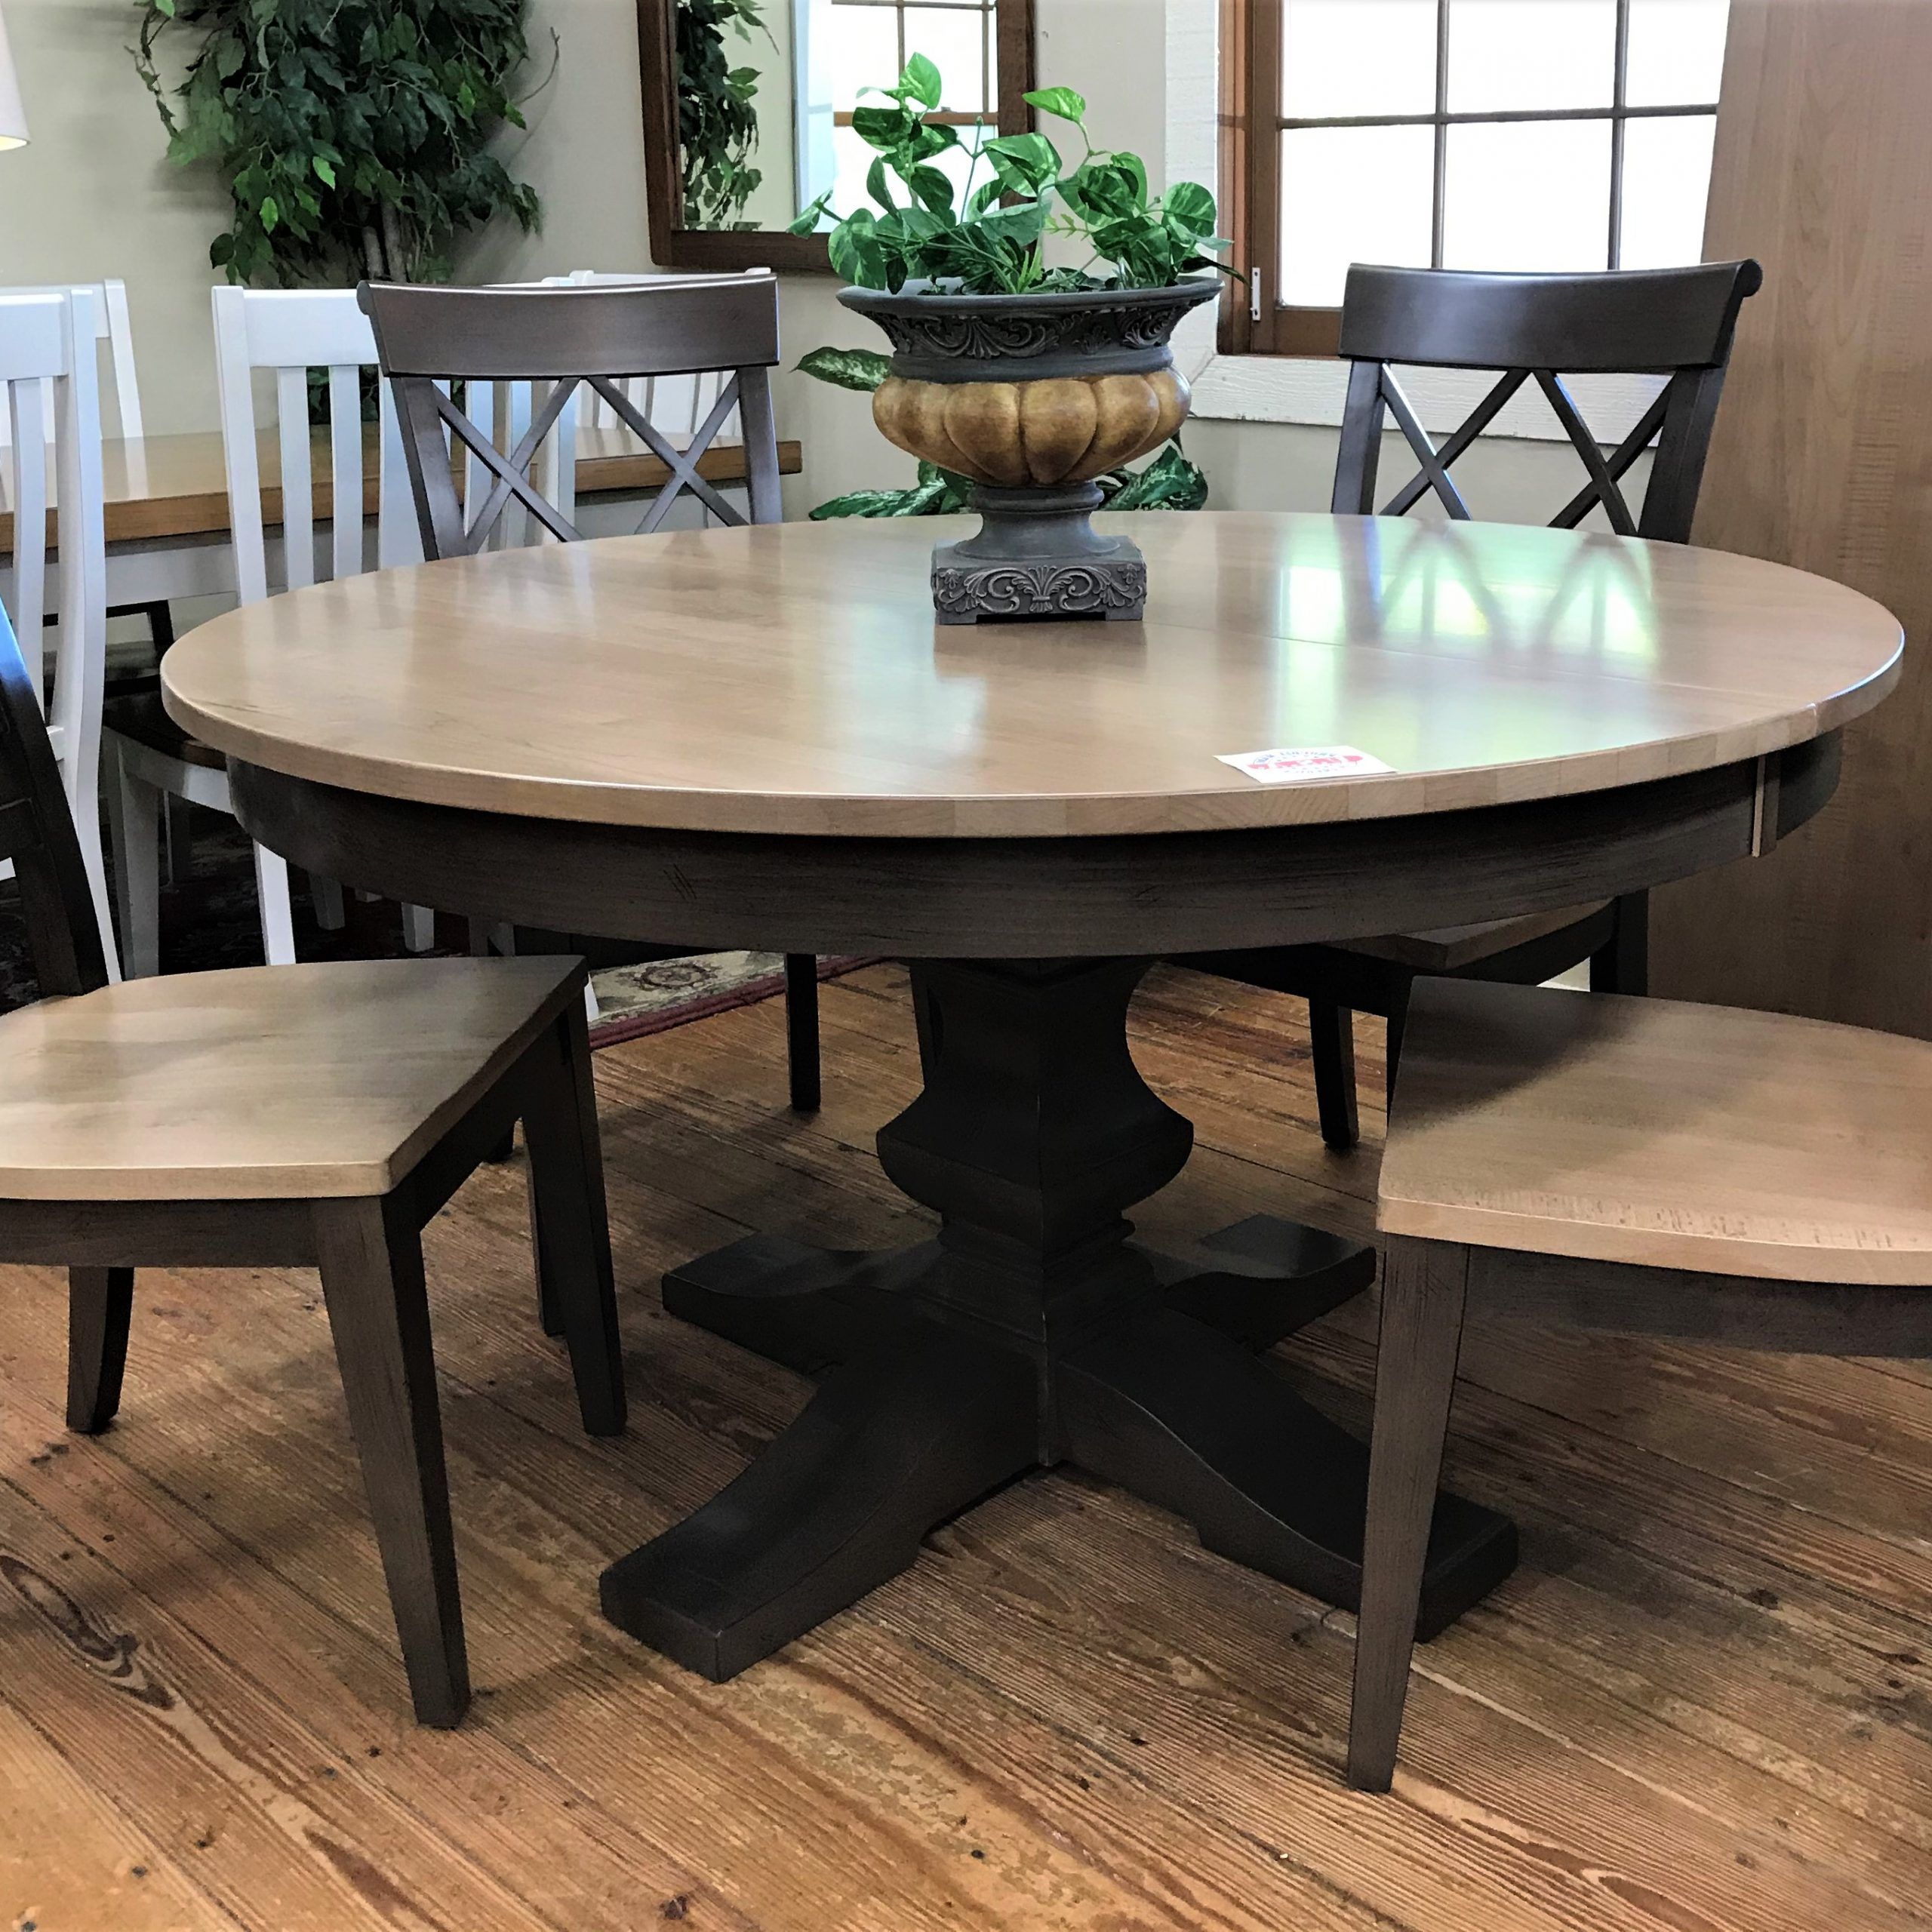 Annie Oakley's Wood Furniture Throughout Well Known Babbie Butterfly Leaf Pine Solid Wood Trestle Dining Tables (View 2 of 20)